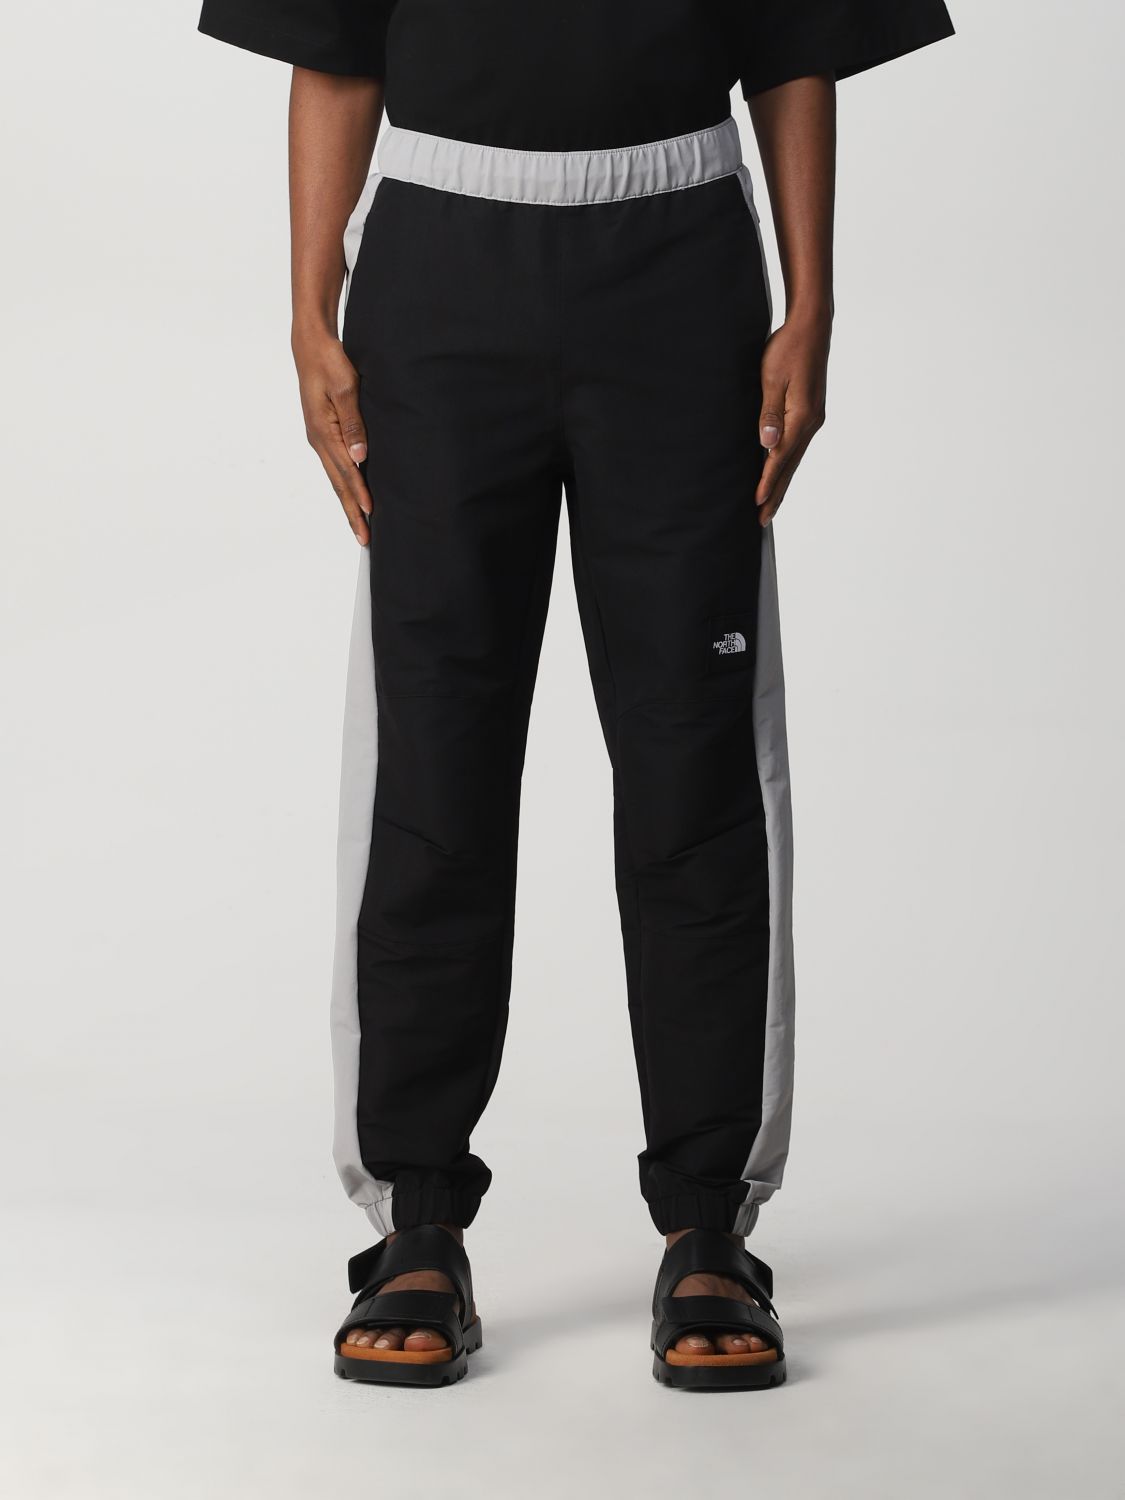 THE NORTH FACE: pants for man - Black | The North Face pants NF0A7R2HJ ...